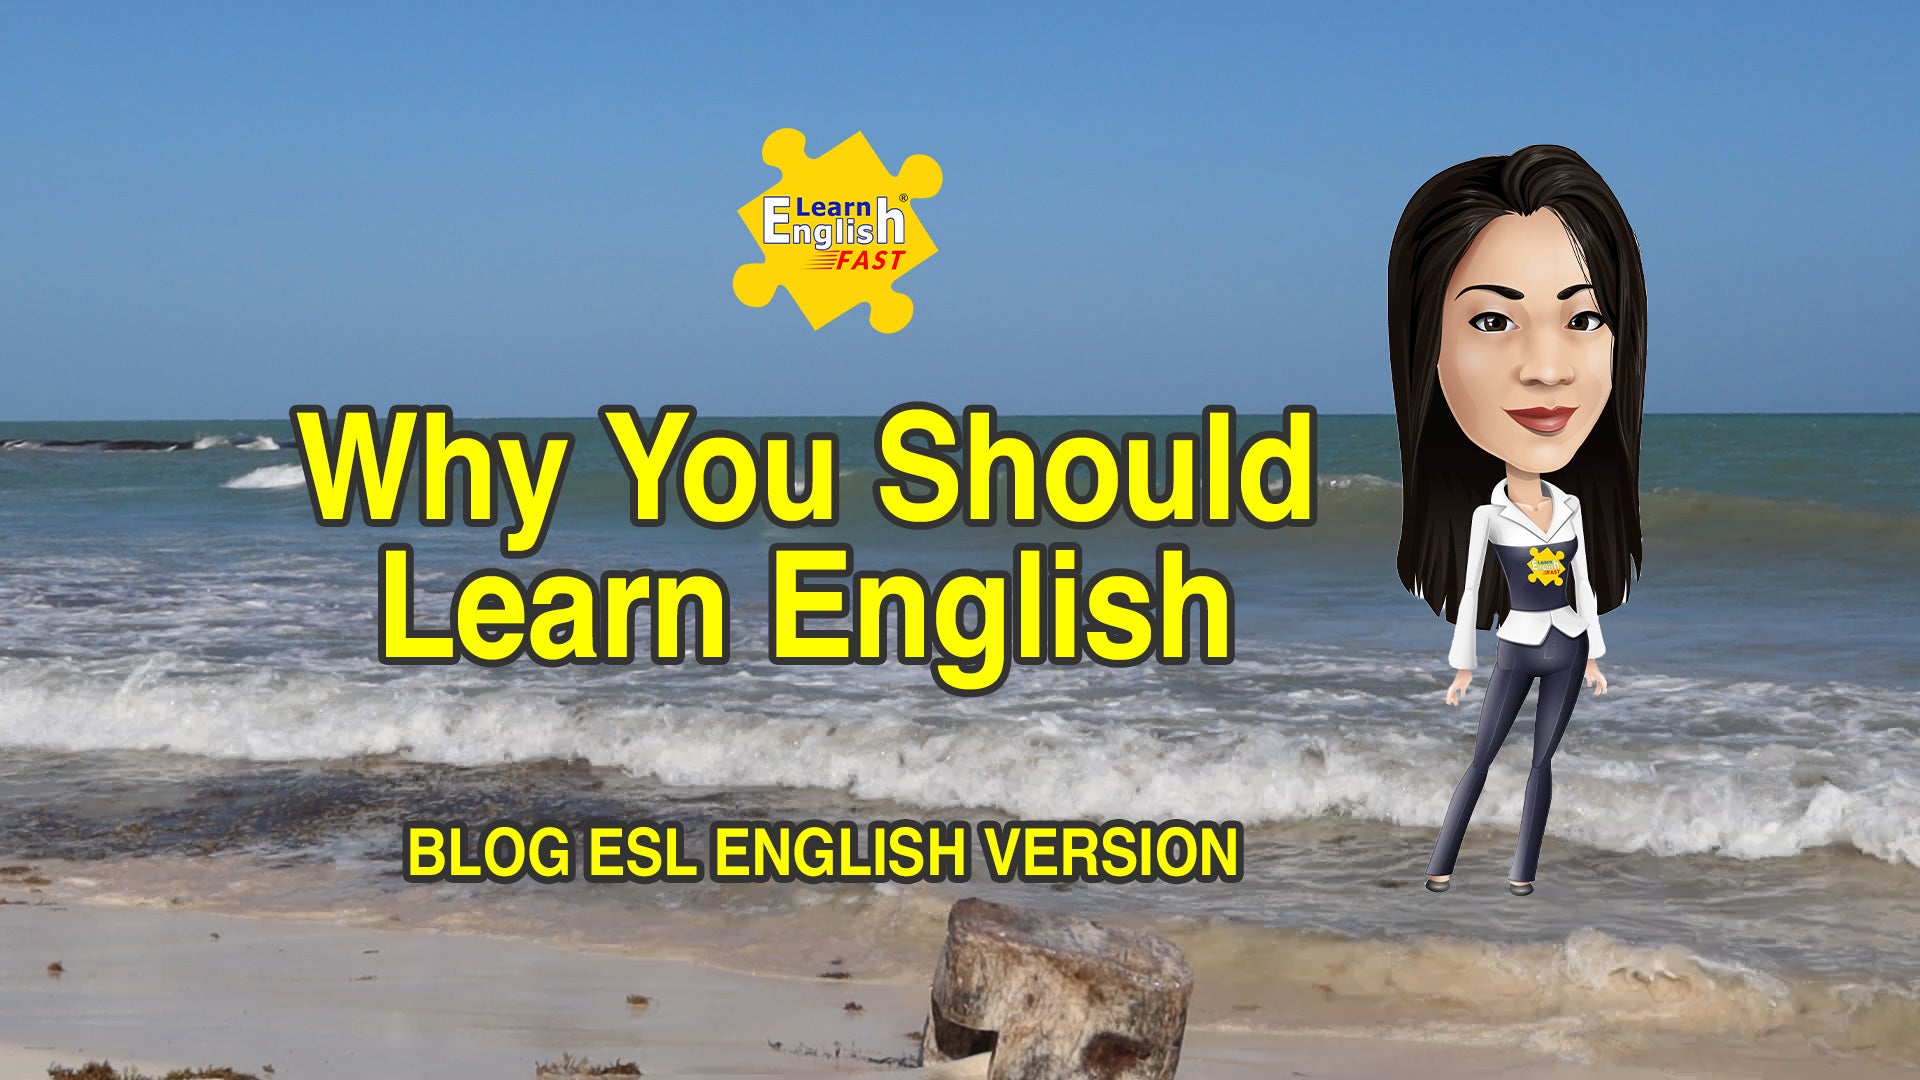 Why Should You Learn English?